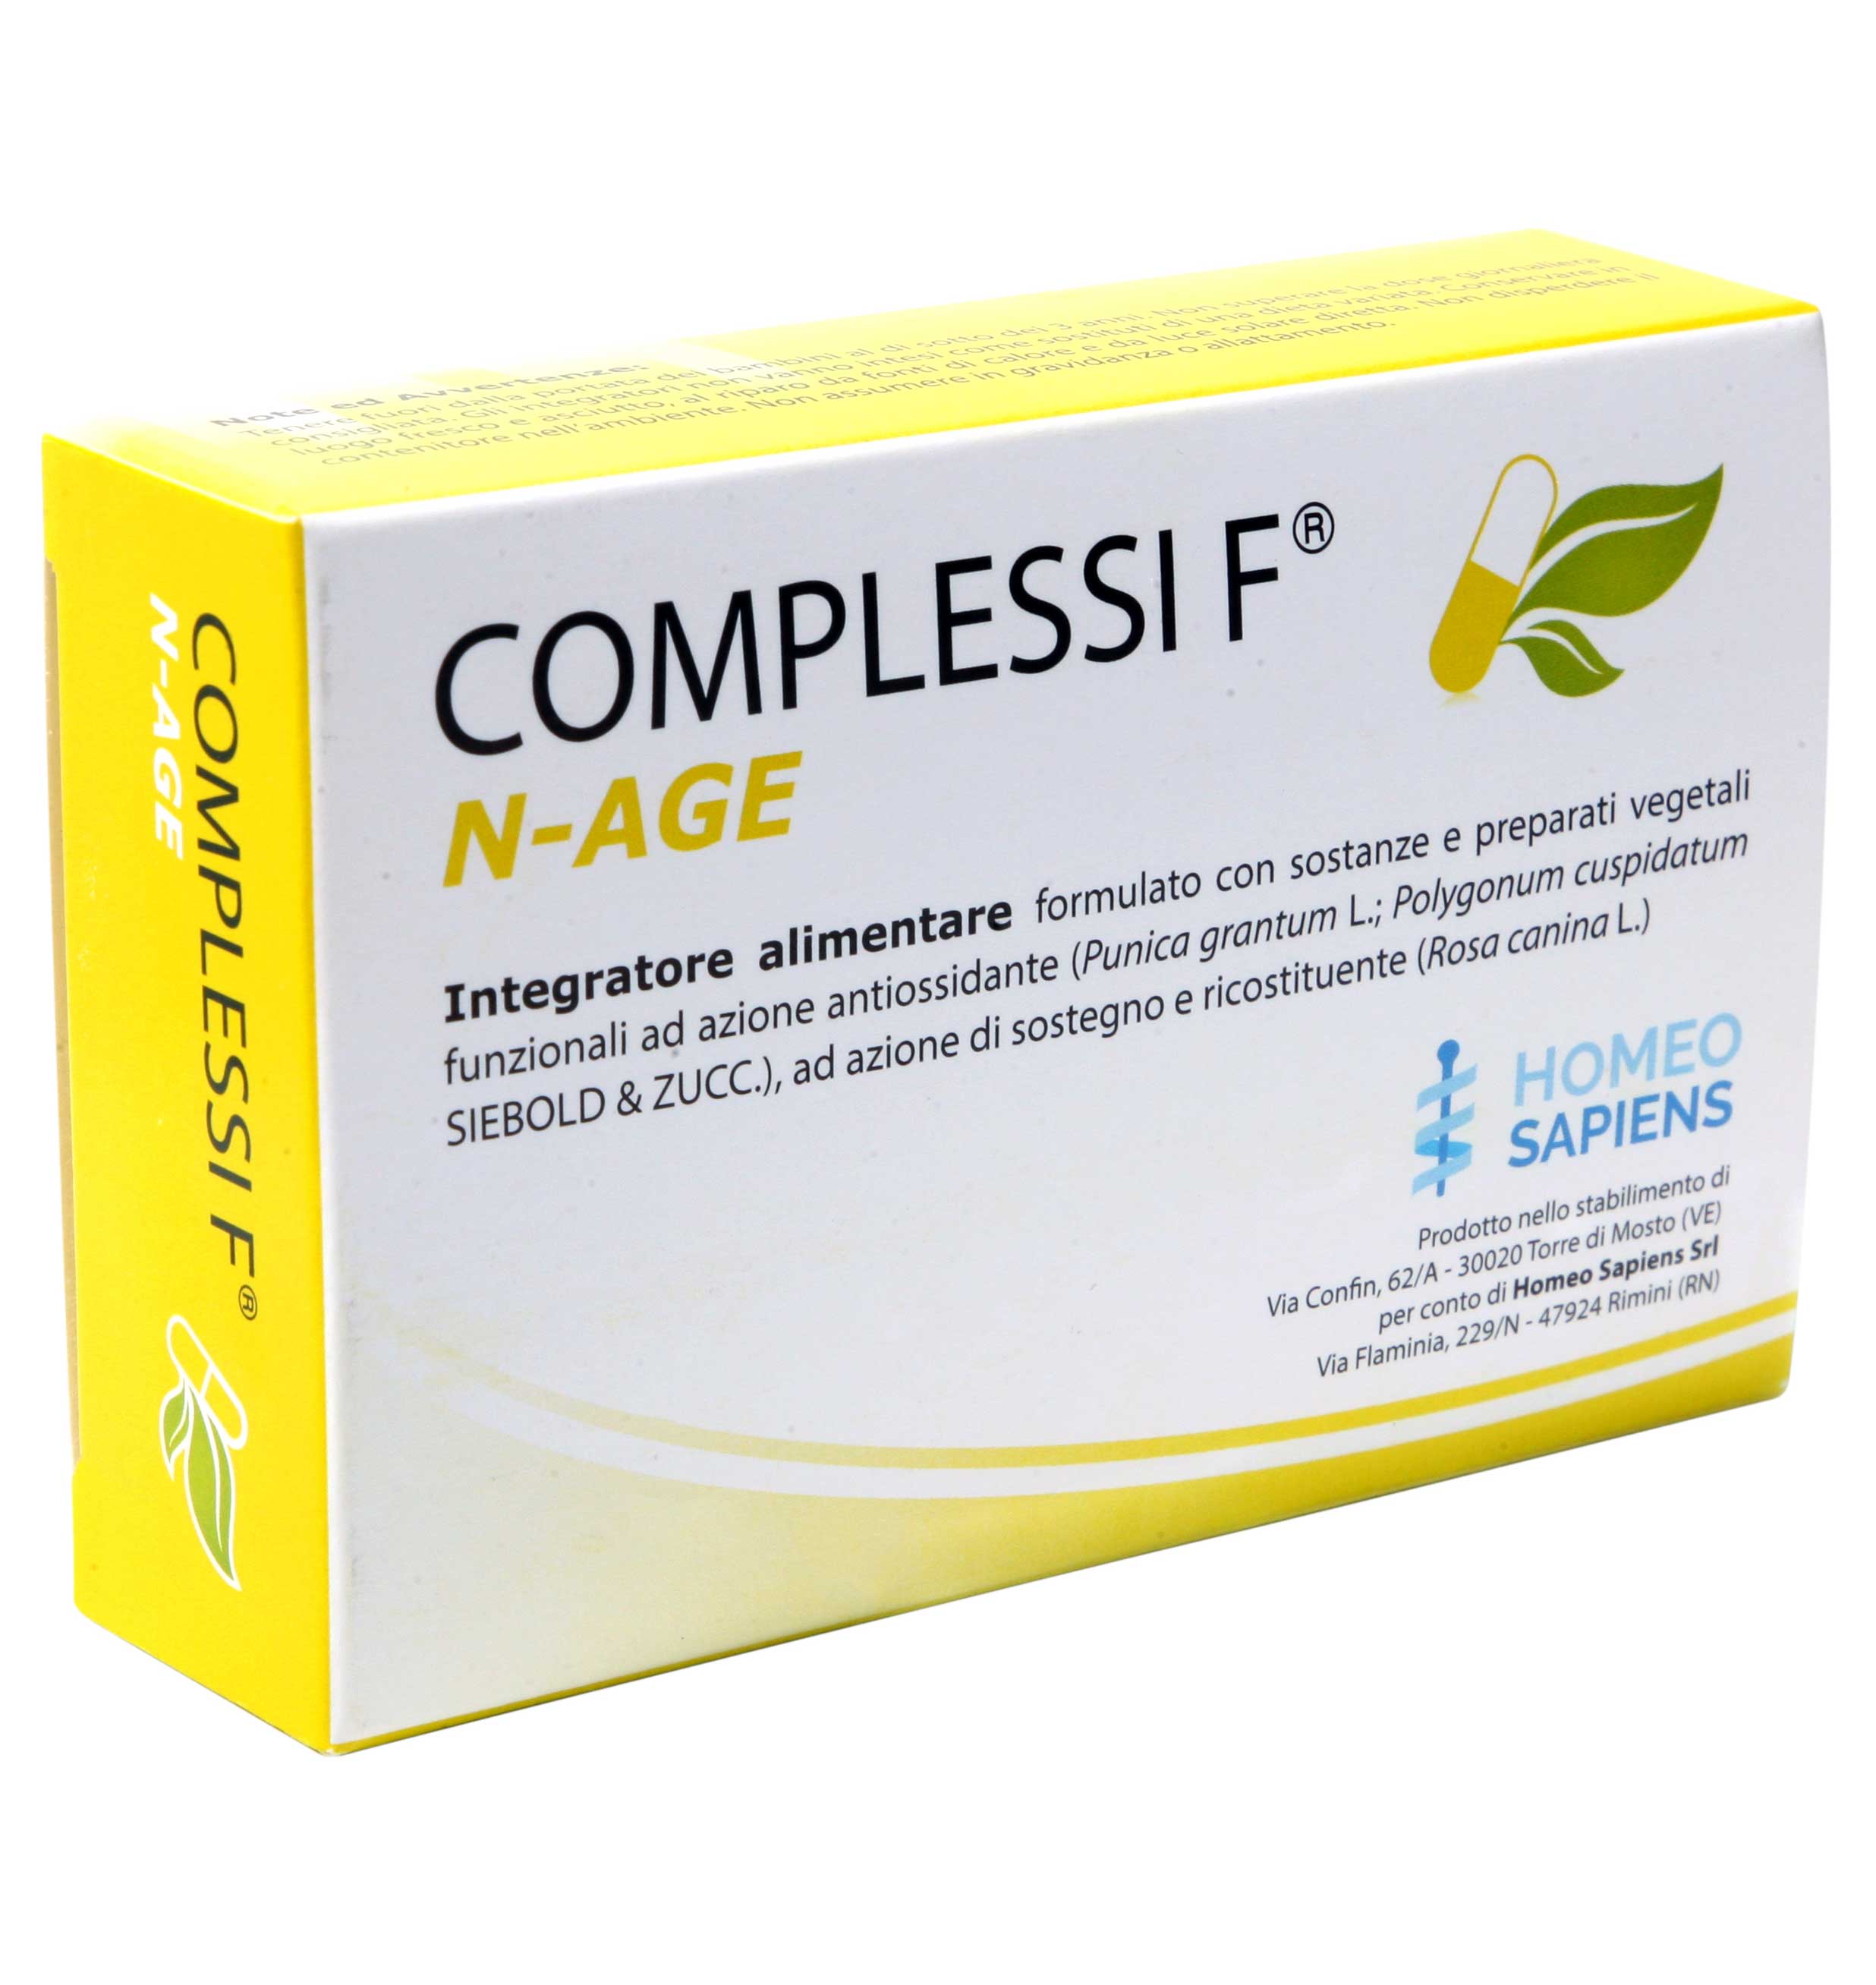 Image of Complessi F N-AGE Homeo Sapiens 30 Compresse